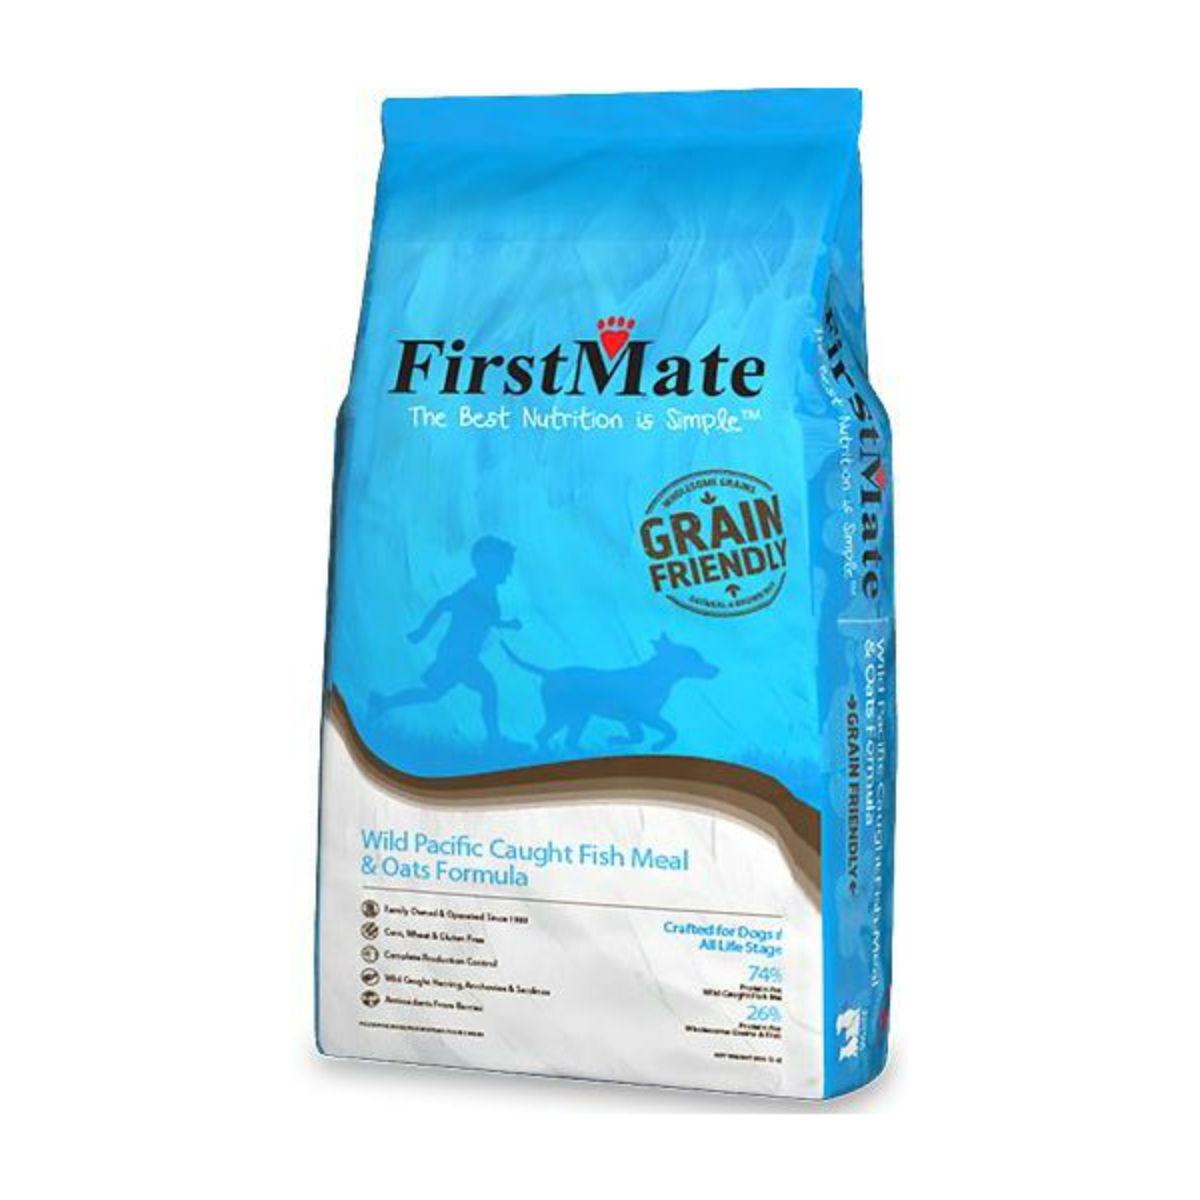 FirstMate Grain Friendly Dog Food - Wild Pacific Caught Fish & Oats